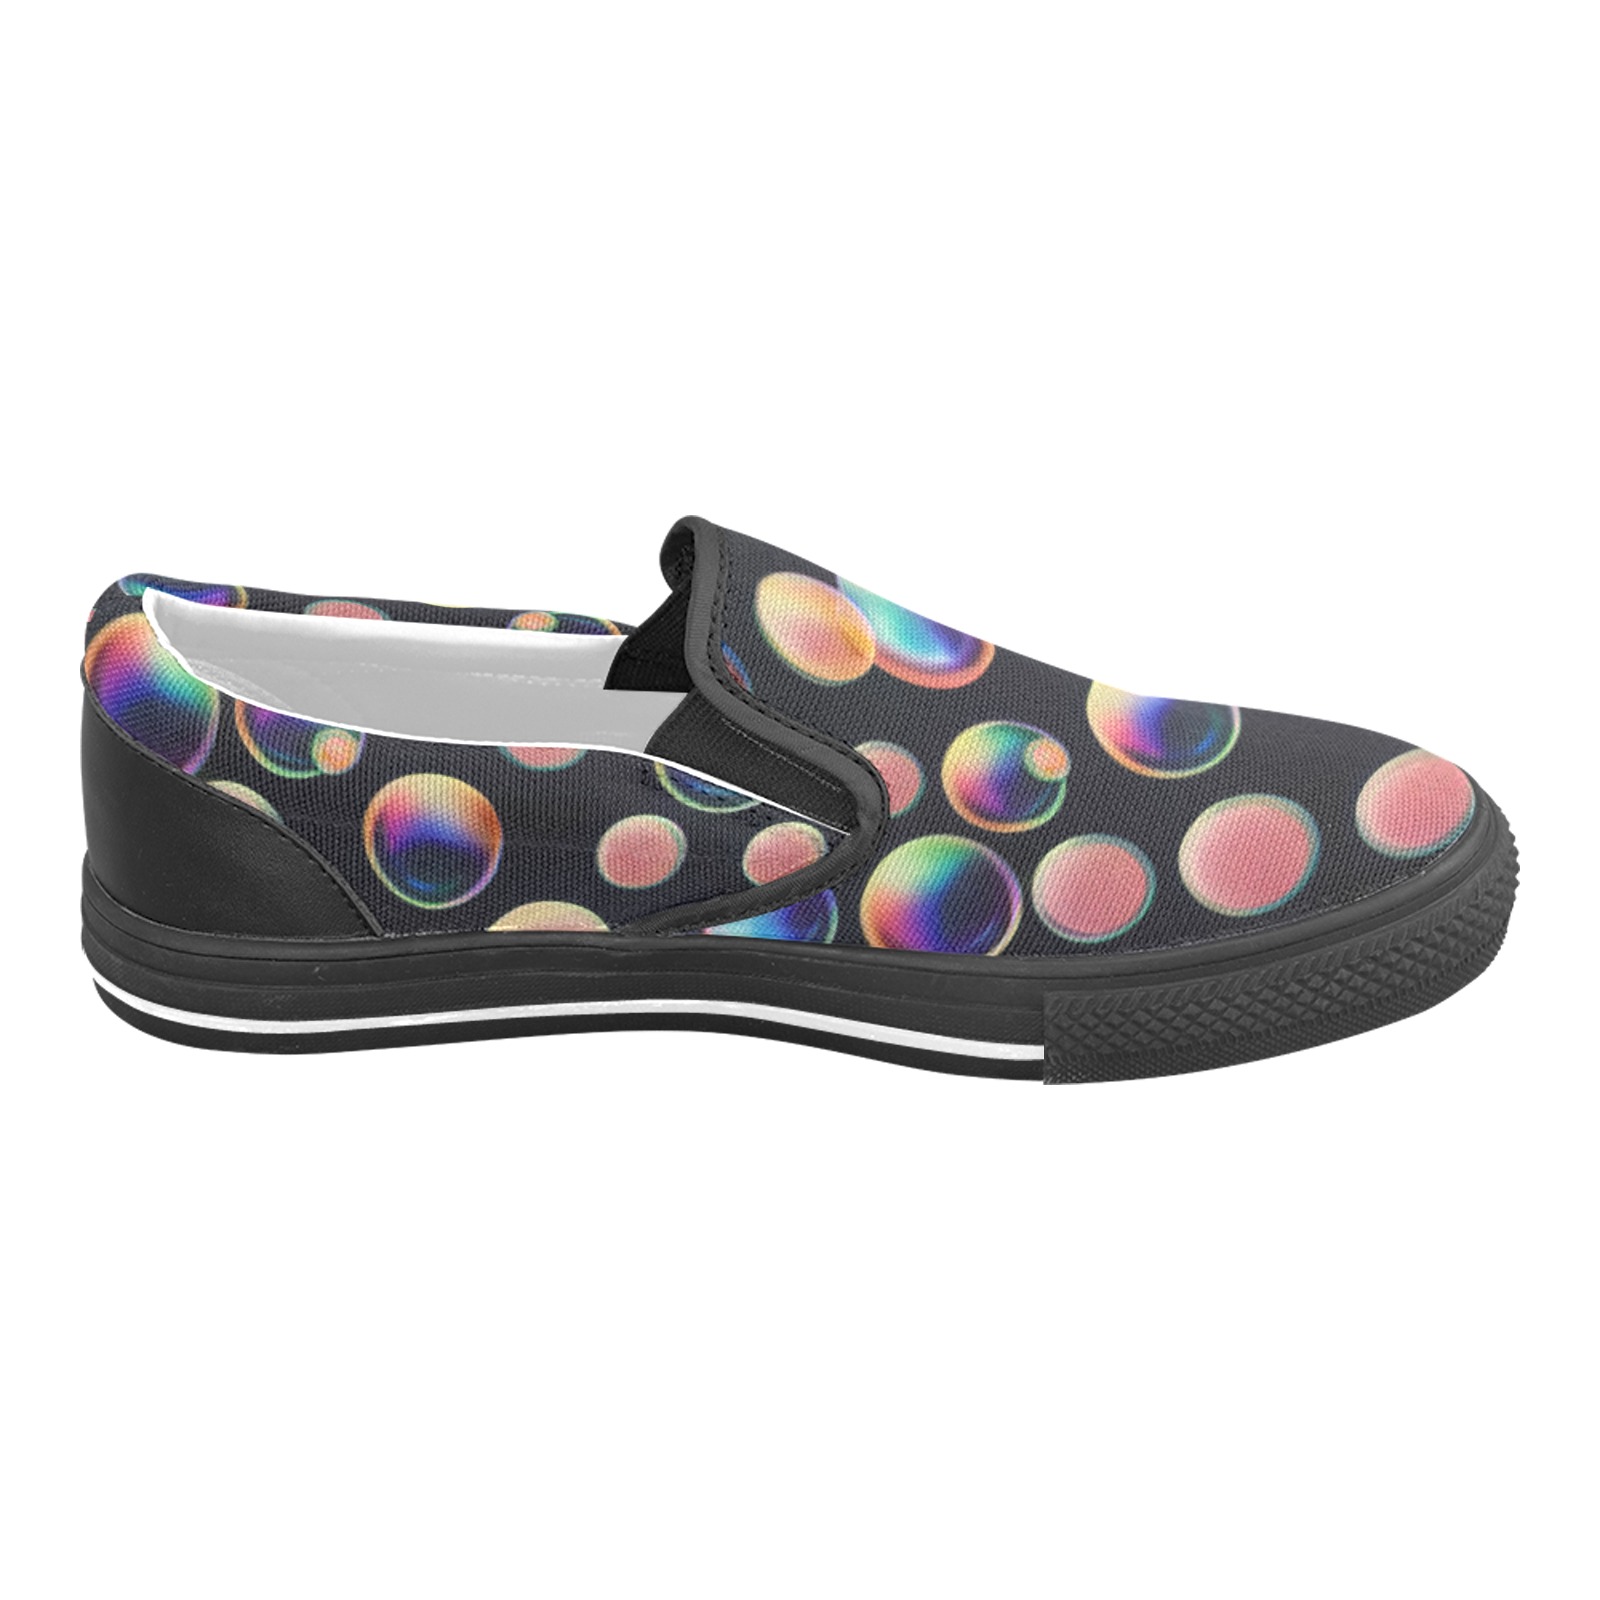 bubbles pattern 1 b Slip-on Canvas Shoes for Kid (Model 019)